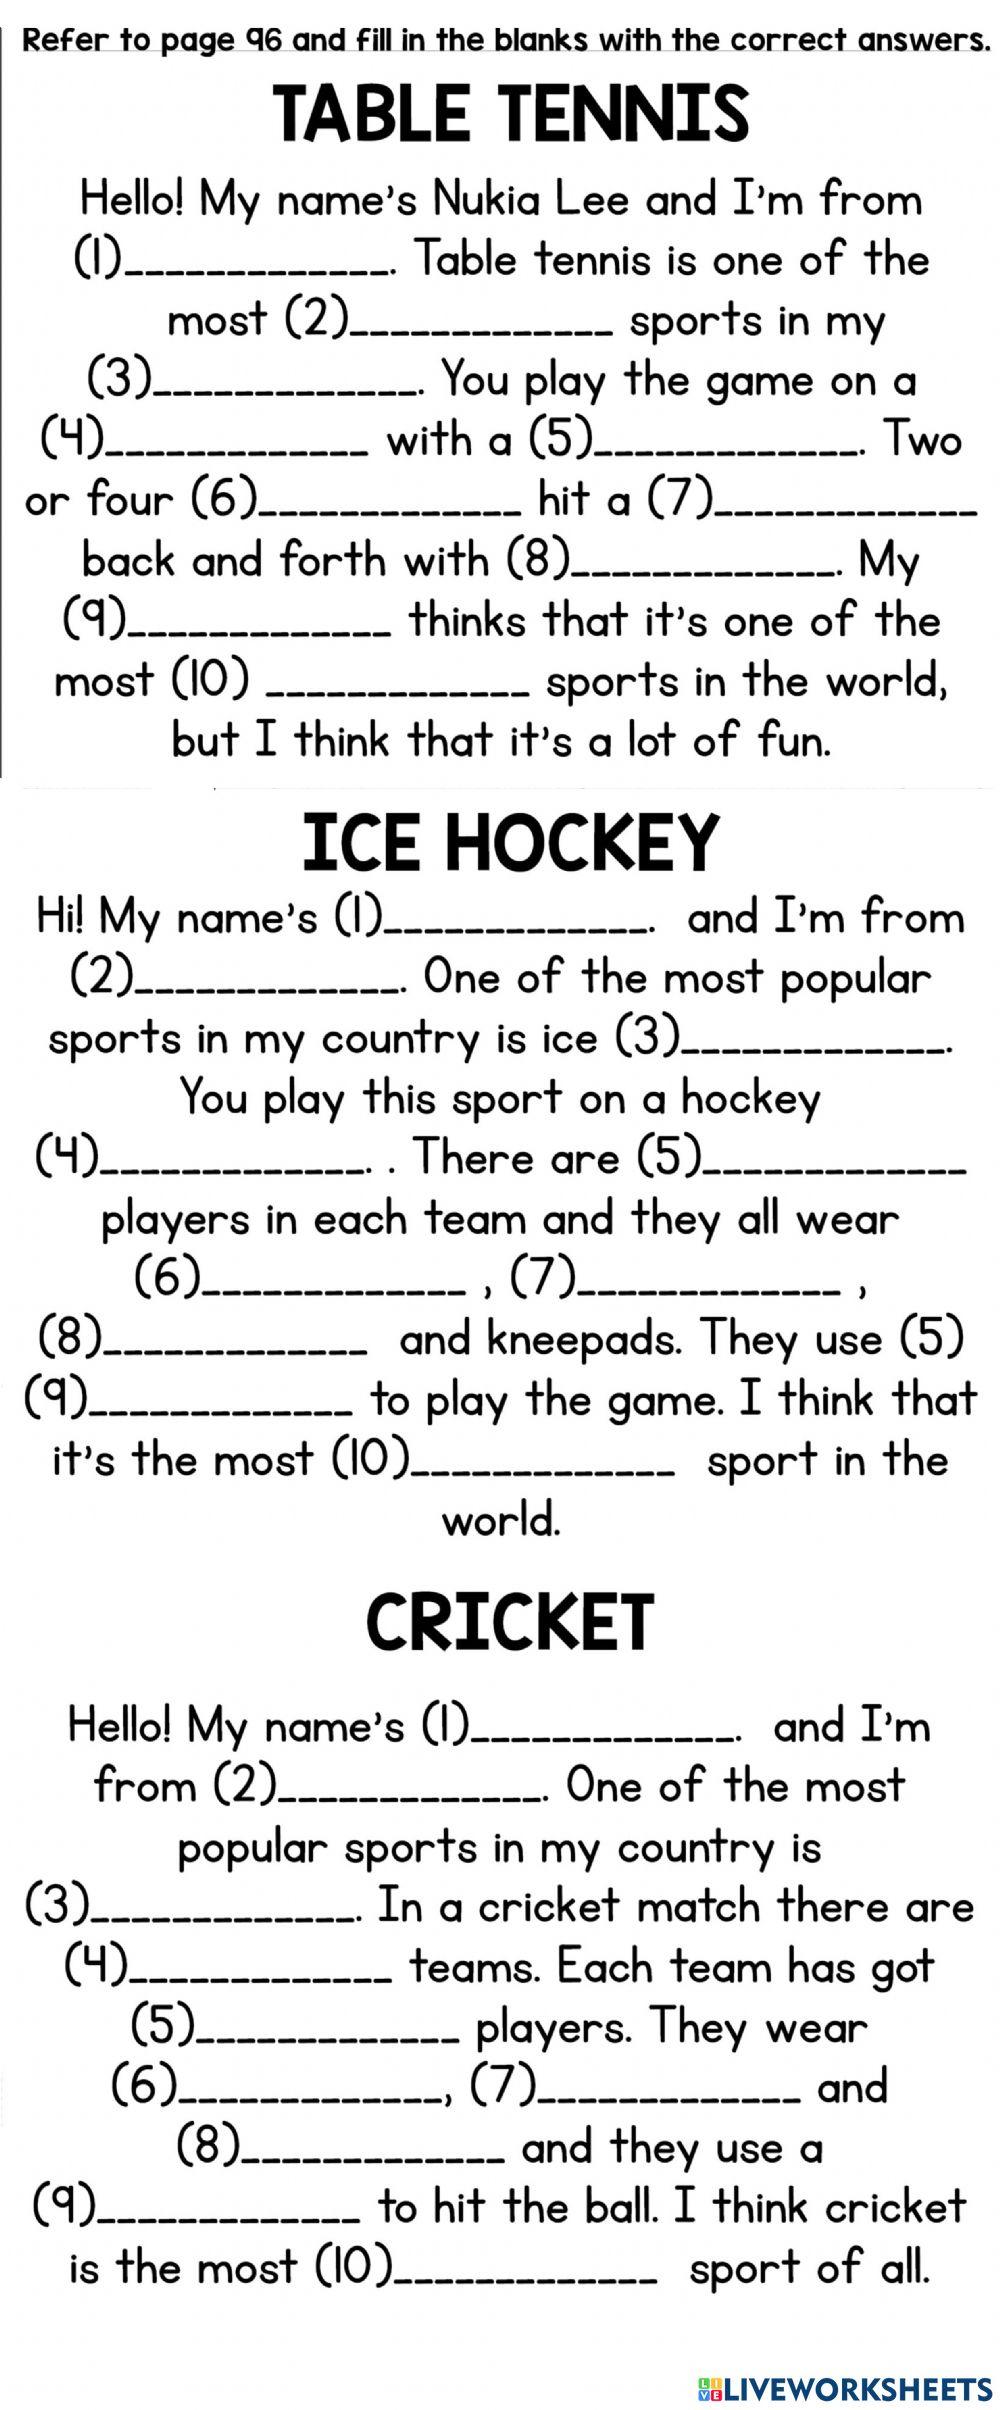 Which Is The Most Popular Sports?